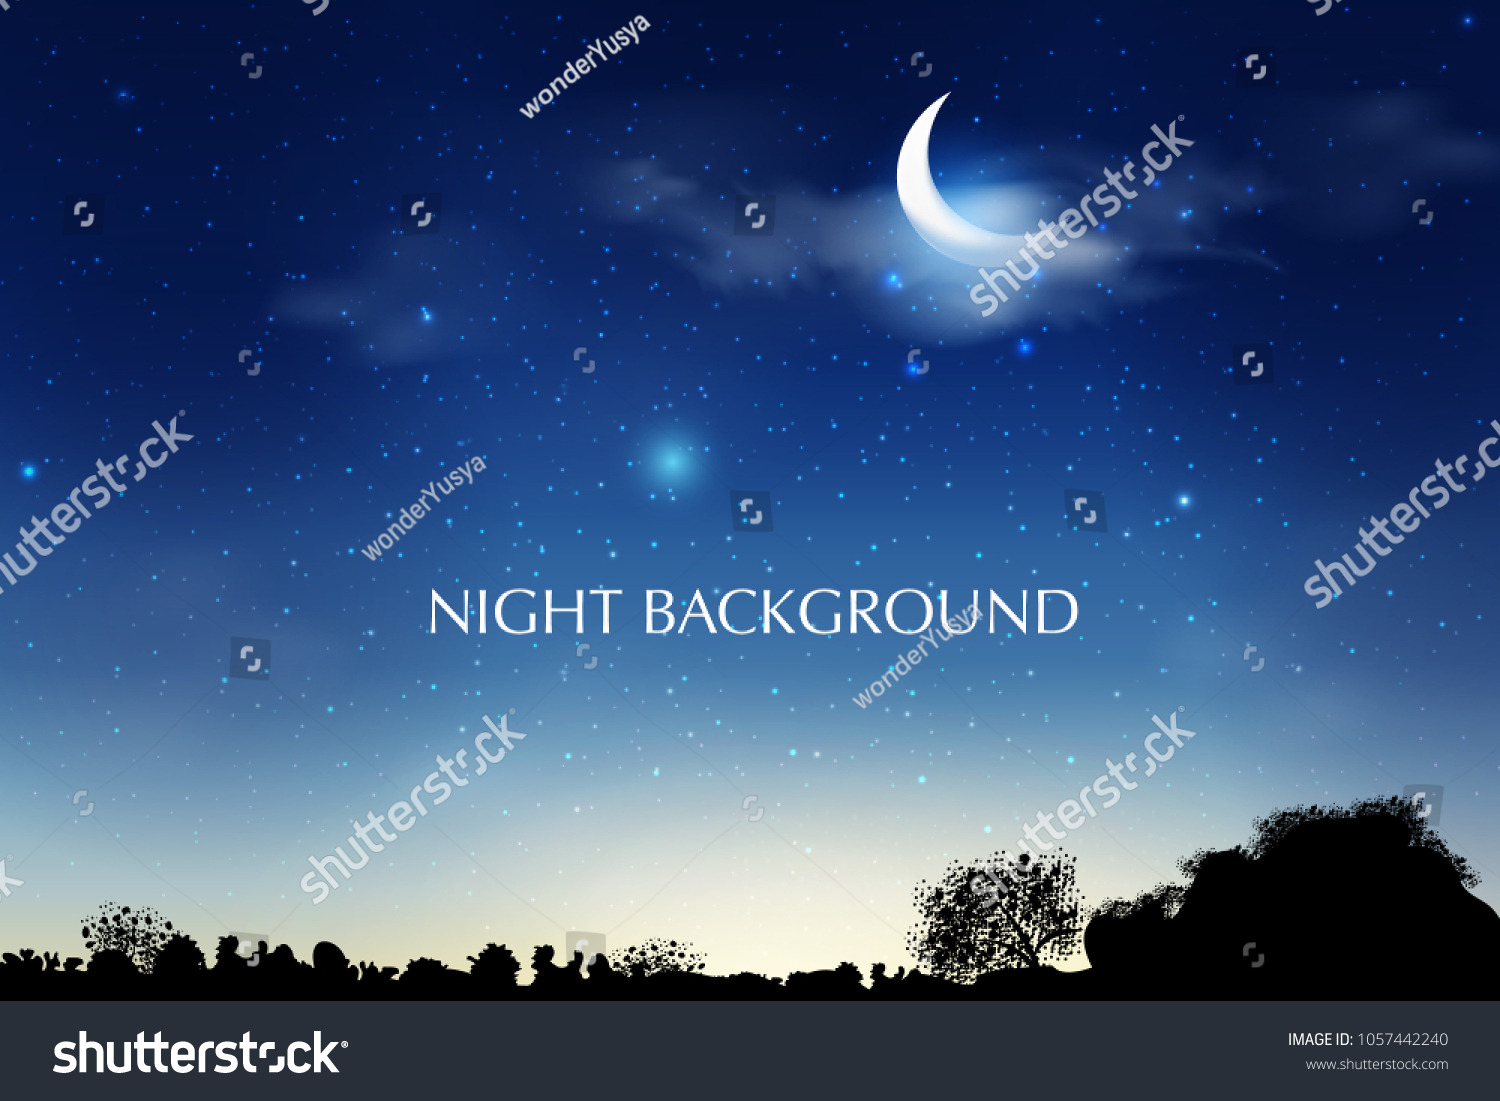 Blue dark Night sky background with half moon, clouds and stars. Moonlight night. Vector illustration. Milkyway cosmos background
 #1057442240